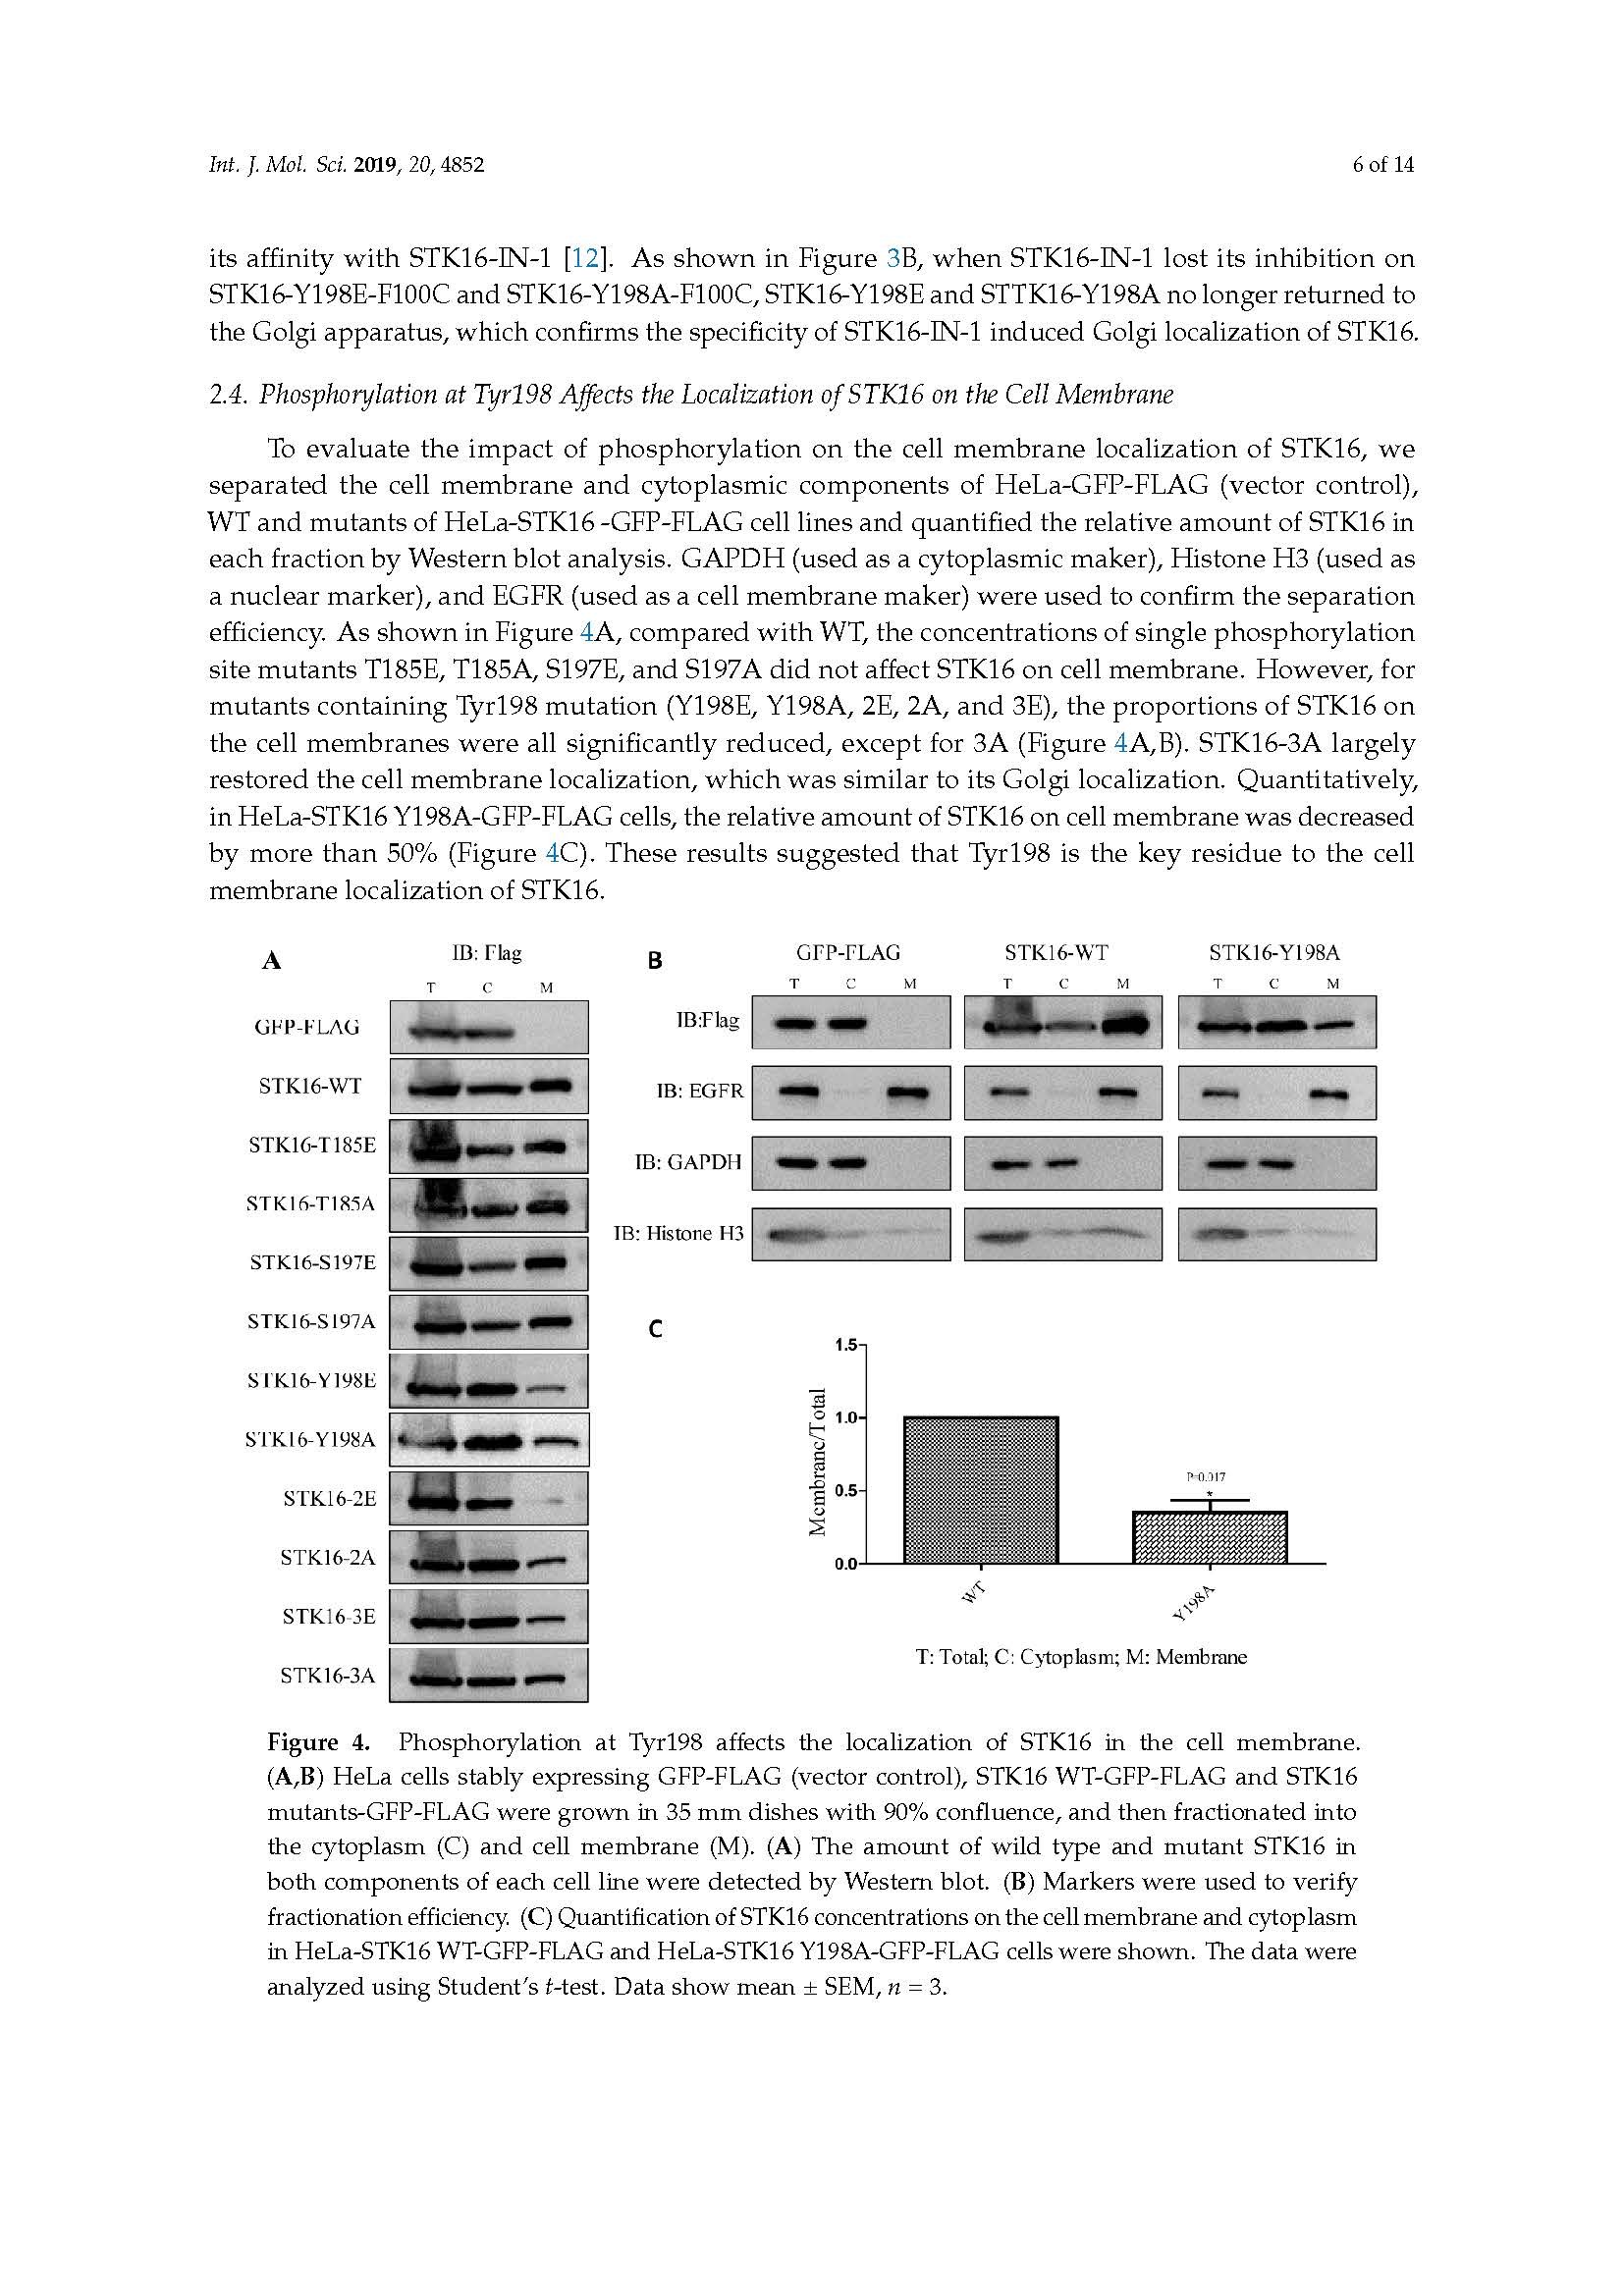 37-2019 Tyr198 is the essential autophosphorylation site for STK16 localization and kinase activity-张欣致谢文章_页面_06